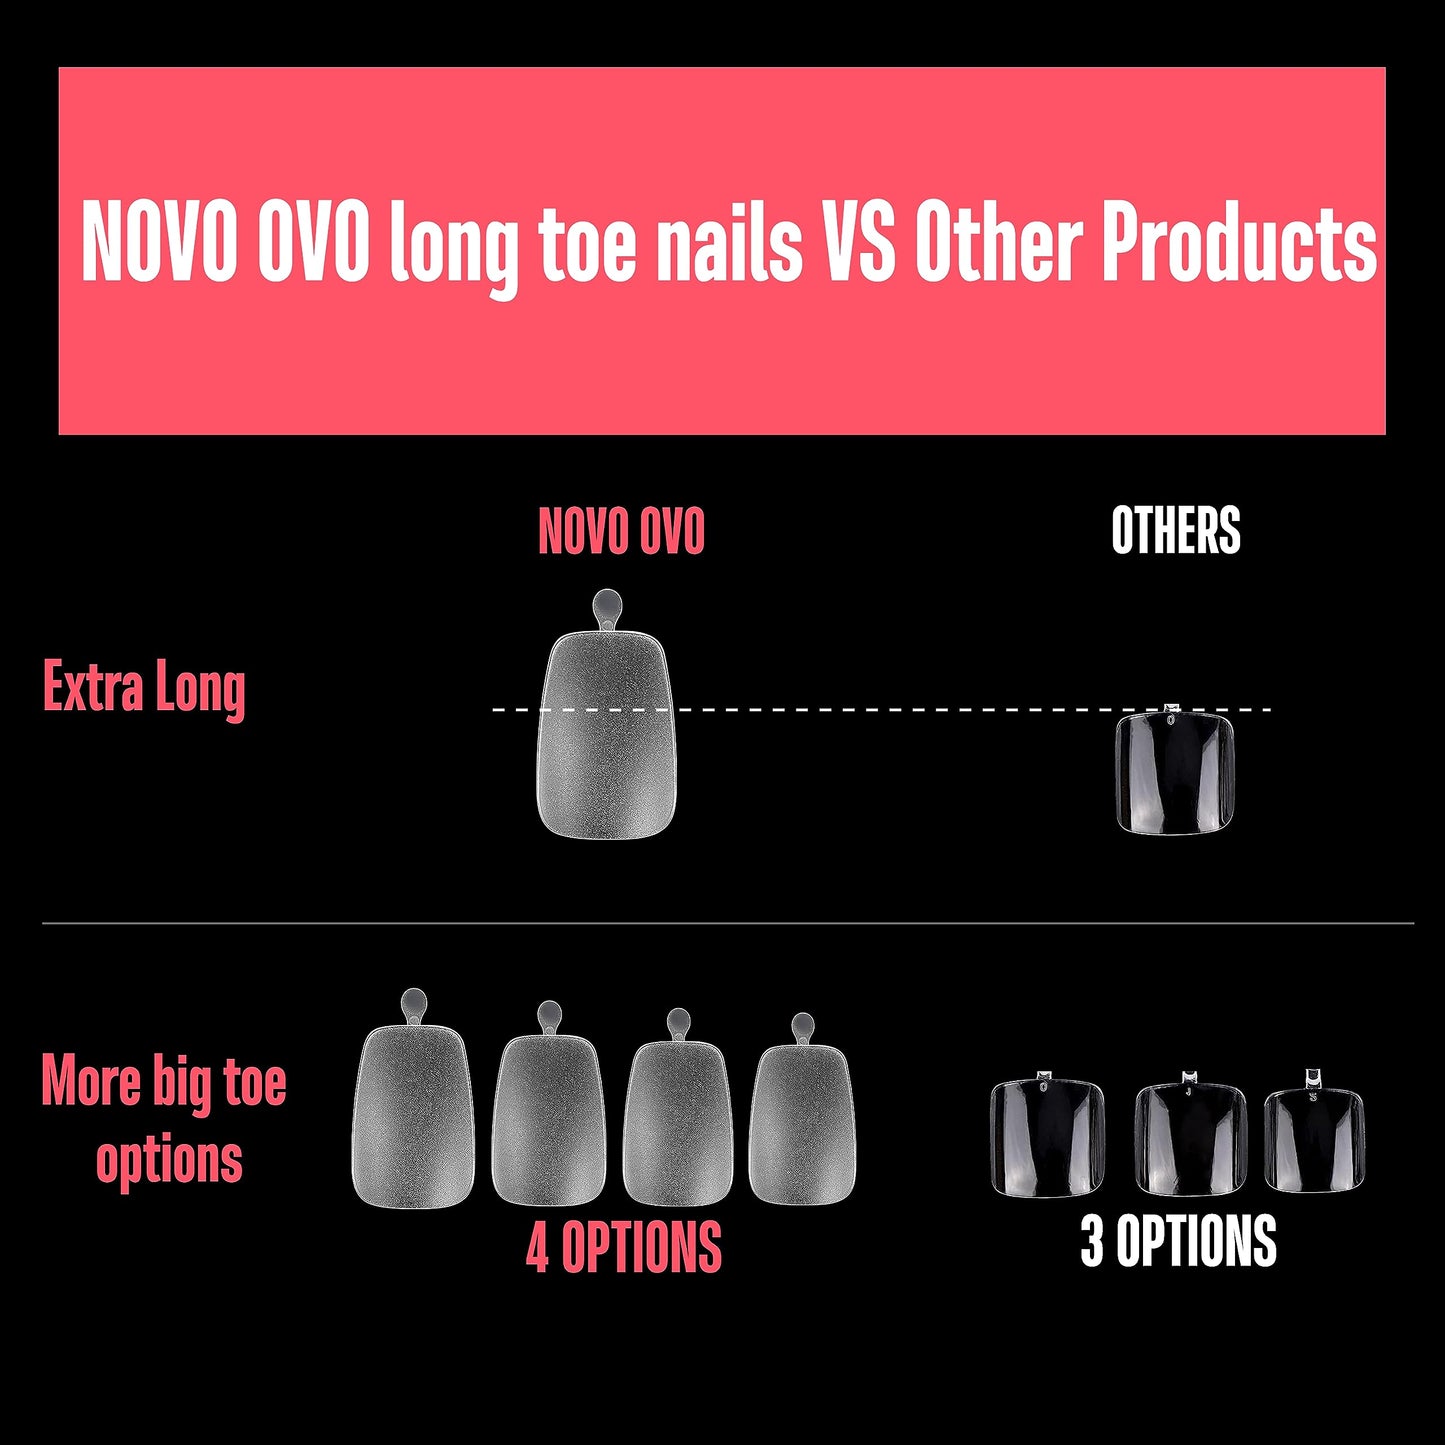 NOVO OVO 120 pcs Long Toe Nail Tips Press on, Curved Full Cover Longtoes Claw, Clear Double Matte Pre-filed Nail Extension for Pedicure Acrylic, Tapered Square Soft Gel Toenails x 12 Sizes